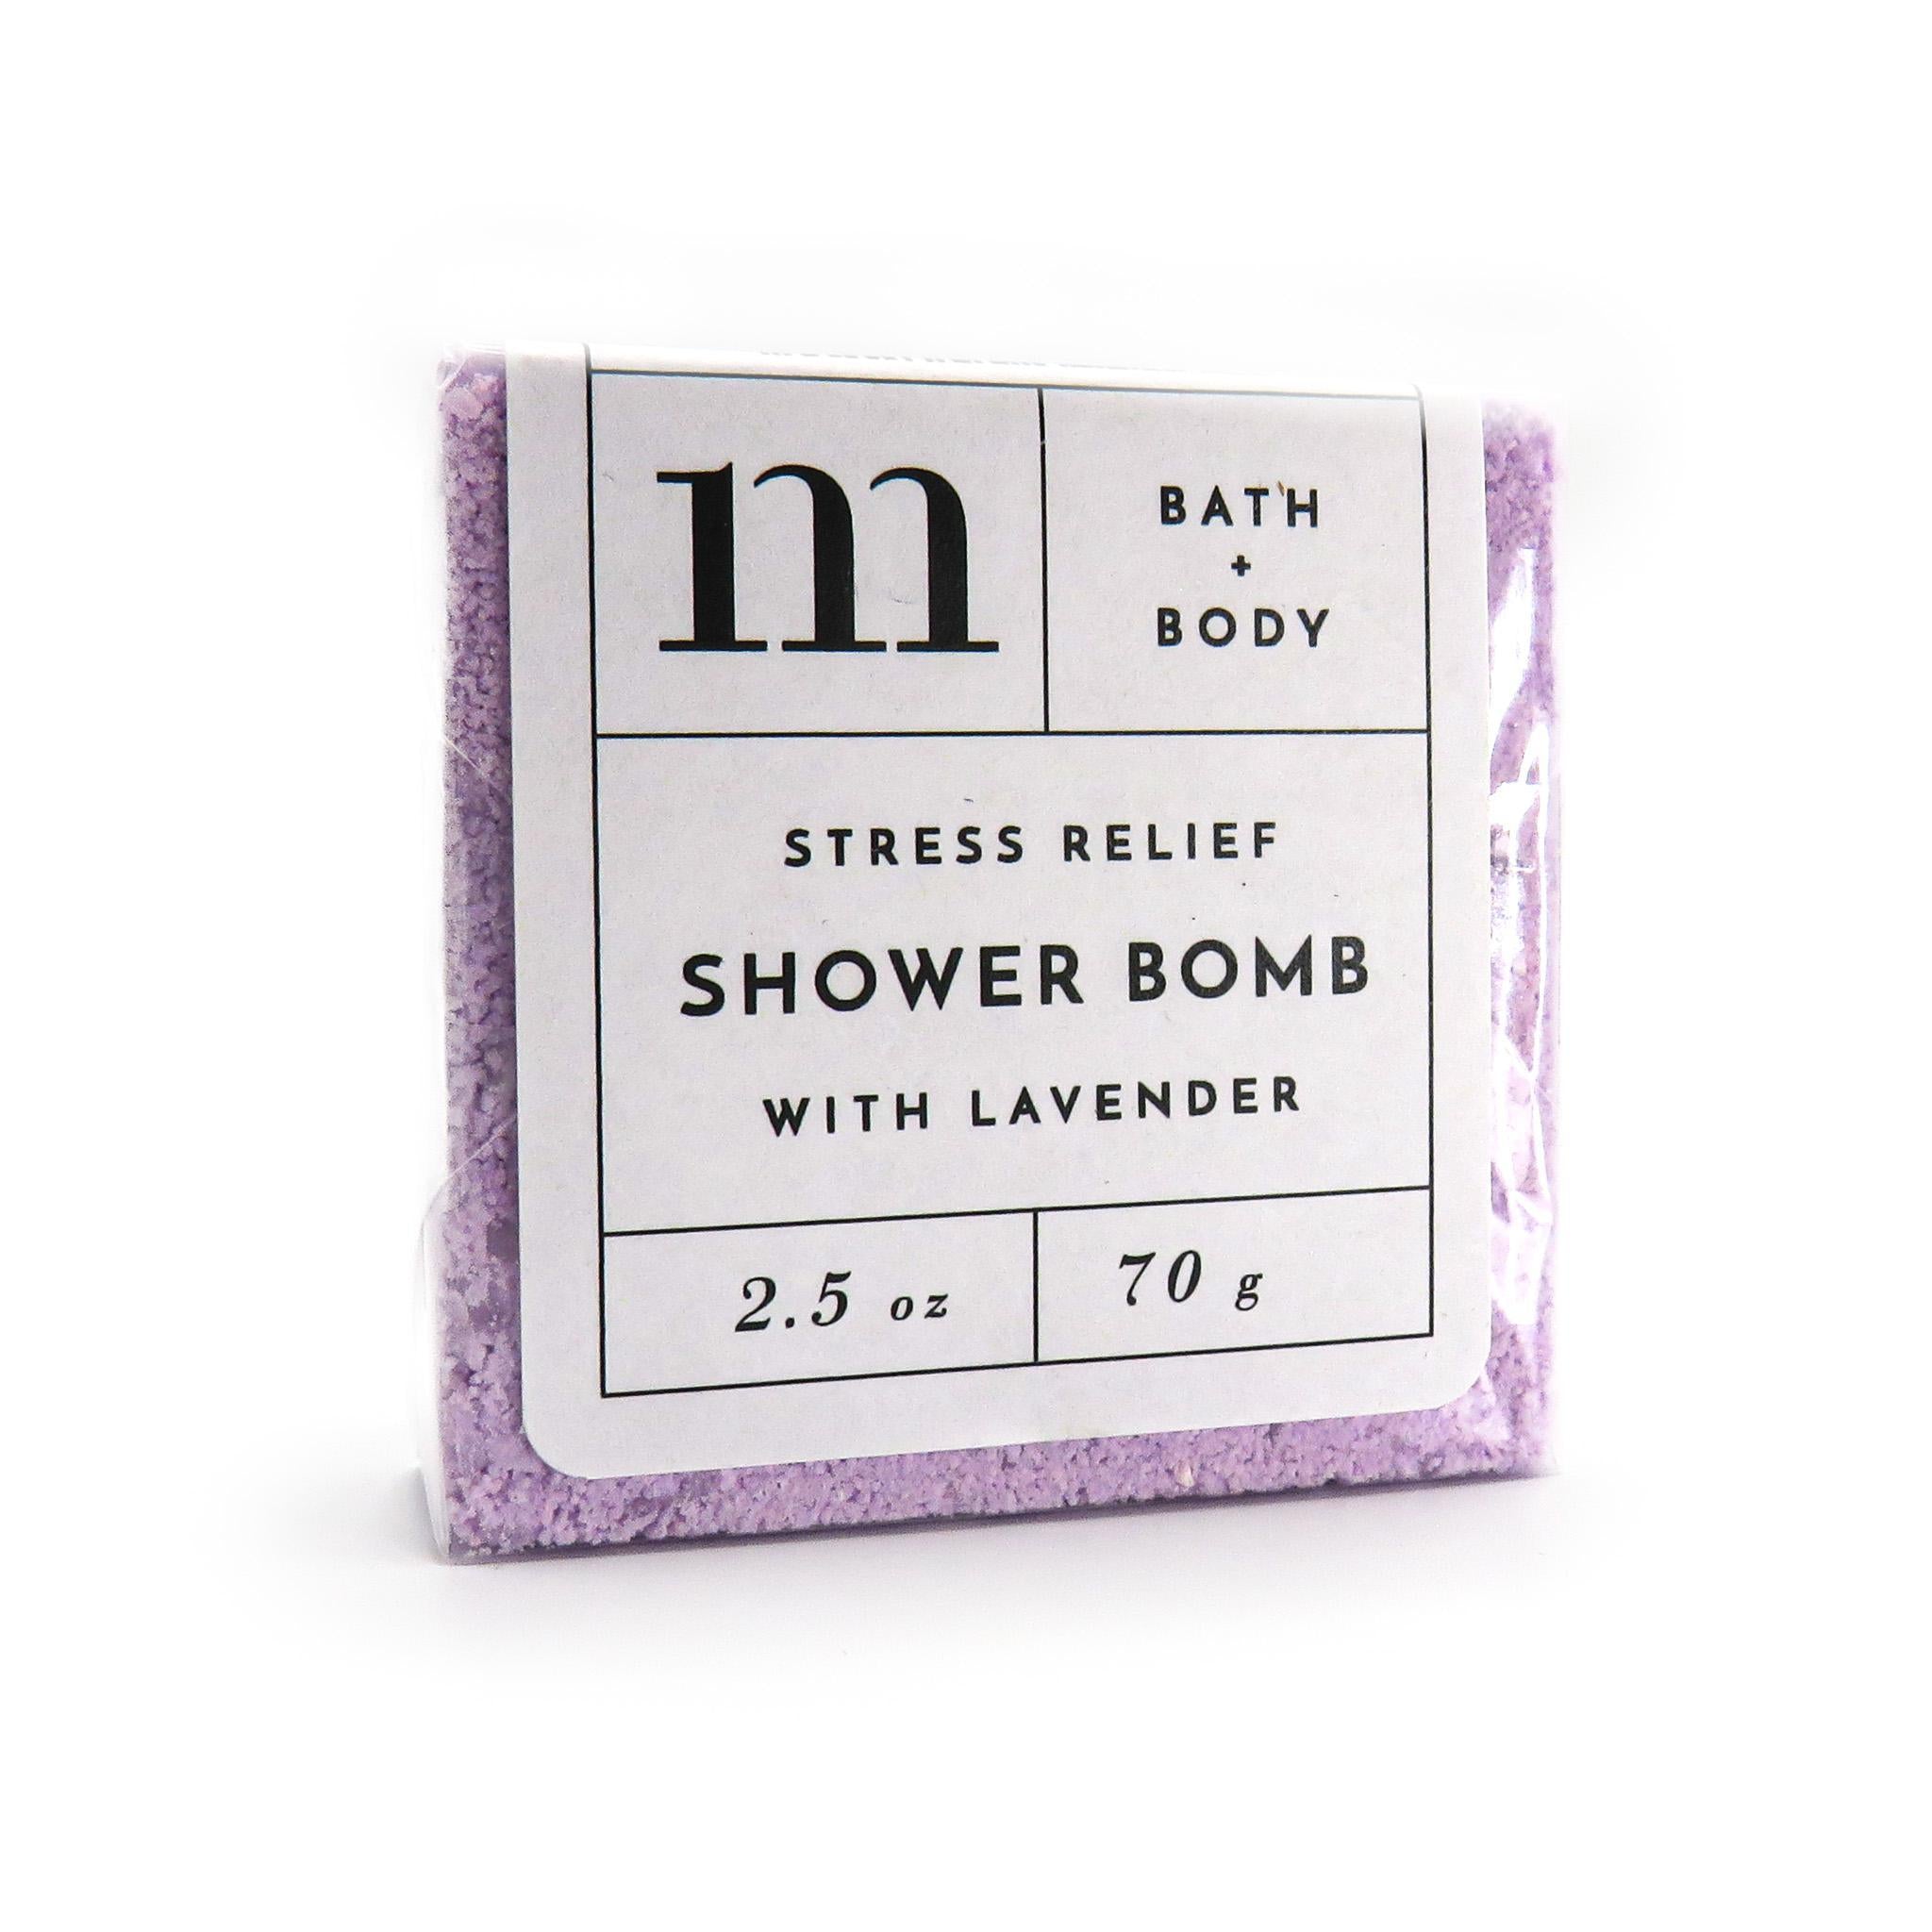  2.5 oz stress relief shower bomb with lavender.